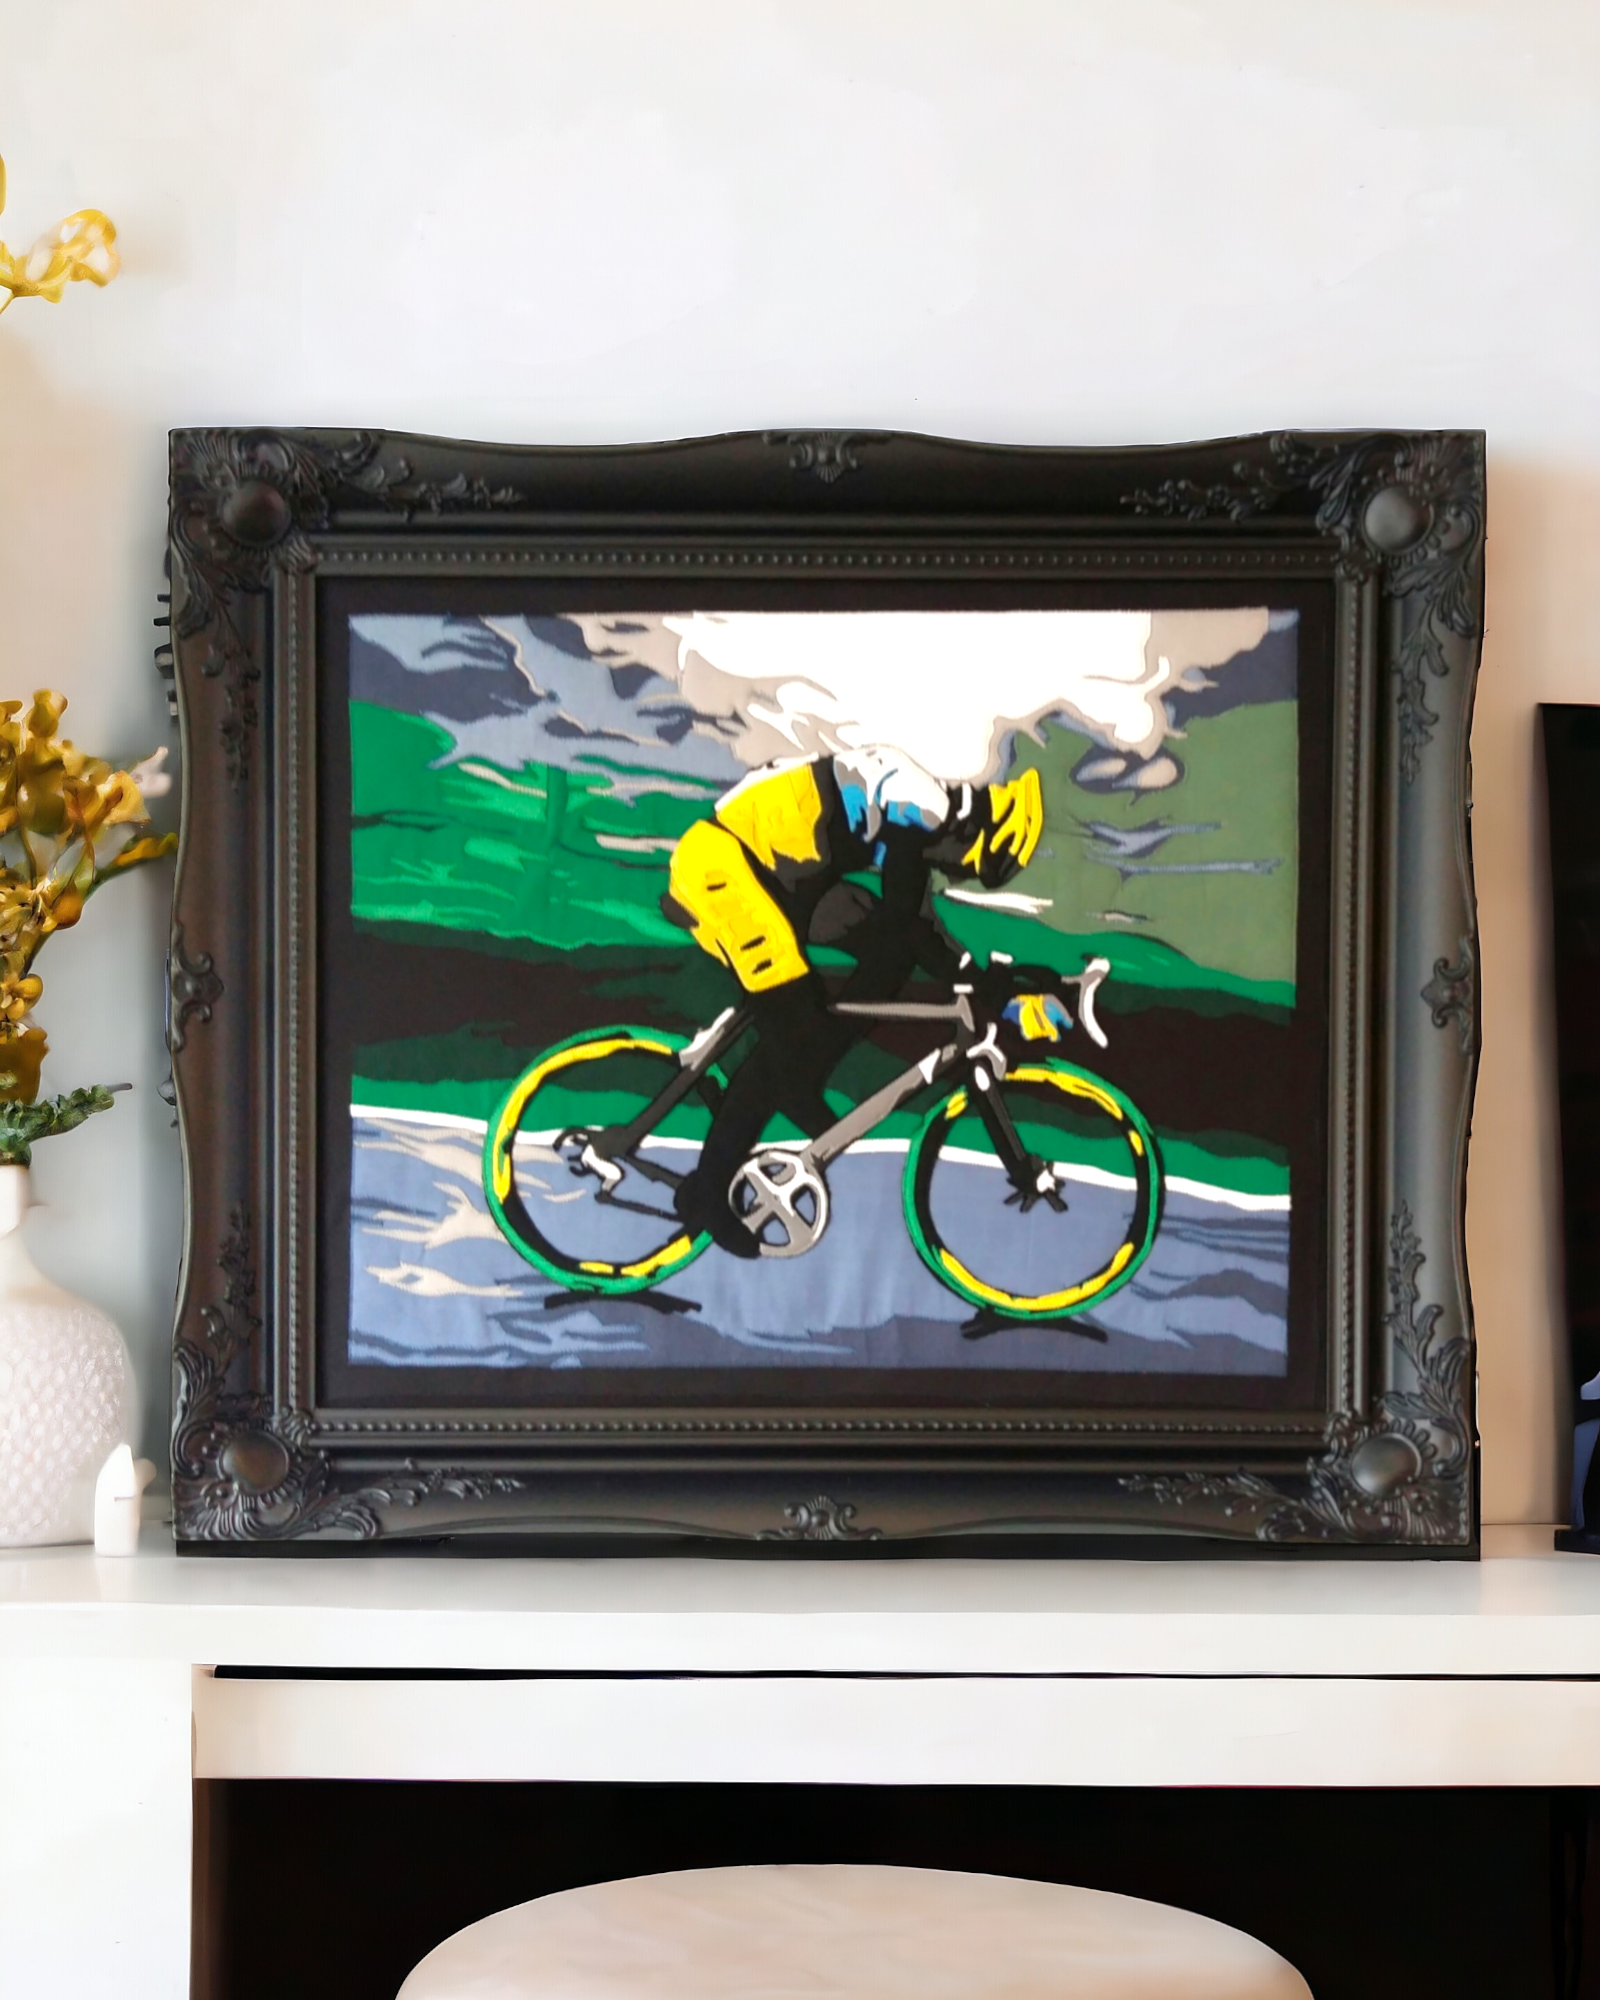 Applique fabric art peice of a cyclist riding along on a wet, rainy day in the uk. Finish in a black Swept framed with white livingroom decor in the background.